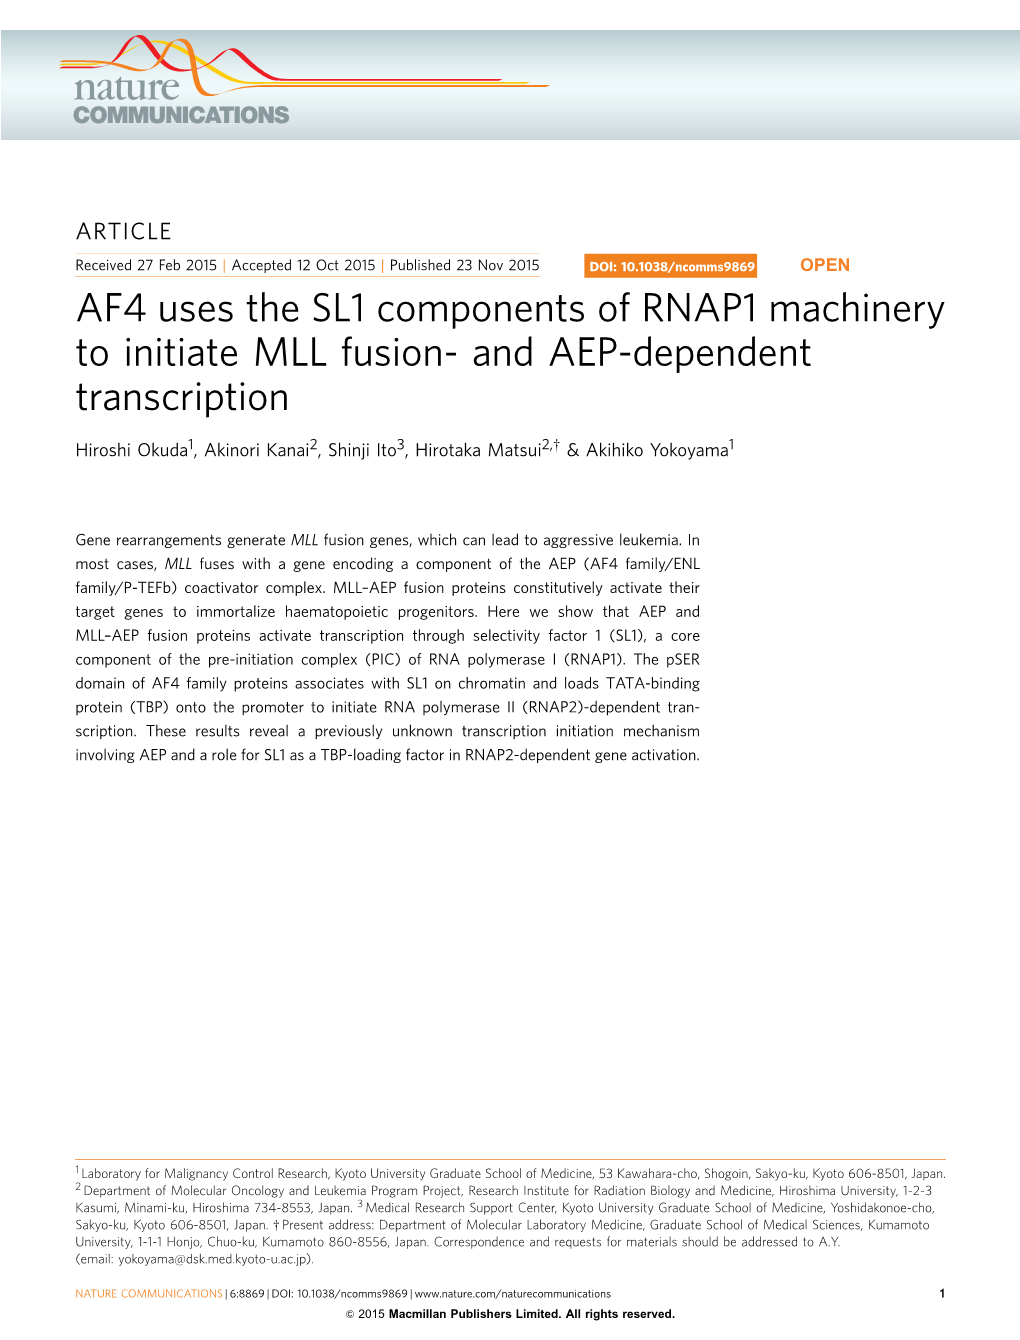 AF4 Uses the SL1 Components of RNAP1 Machinery to Initiate MLL Fusion- and AEP-Dependent Transcription